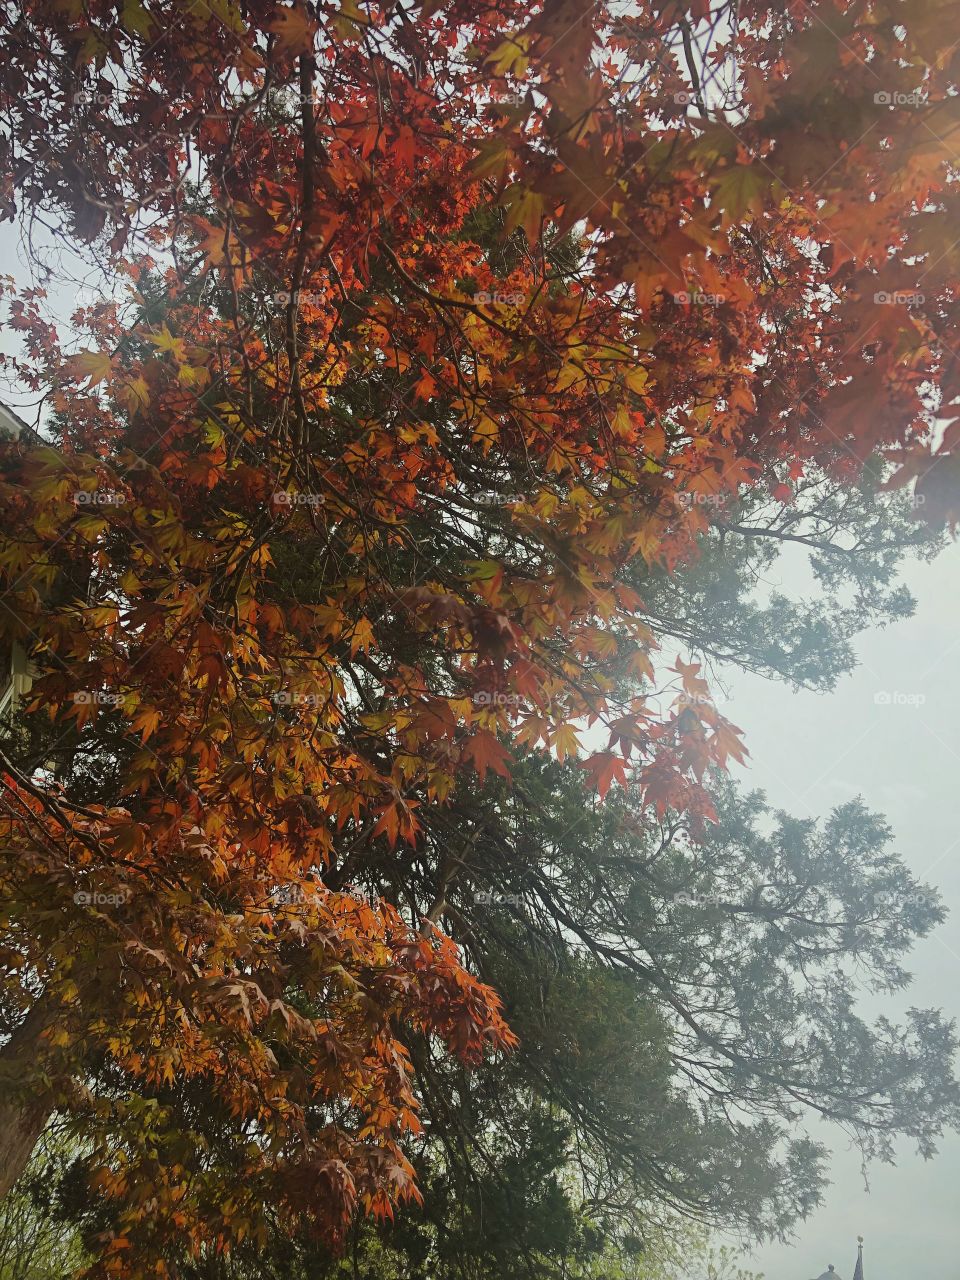 Variation of vivid and lively colored orange, yellow and red leaves during the transition into fall season. Image was taken in the city of New Rochelle, New York.